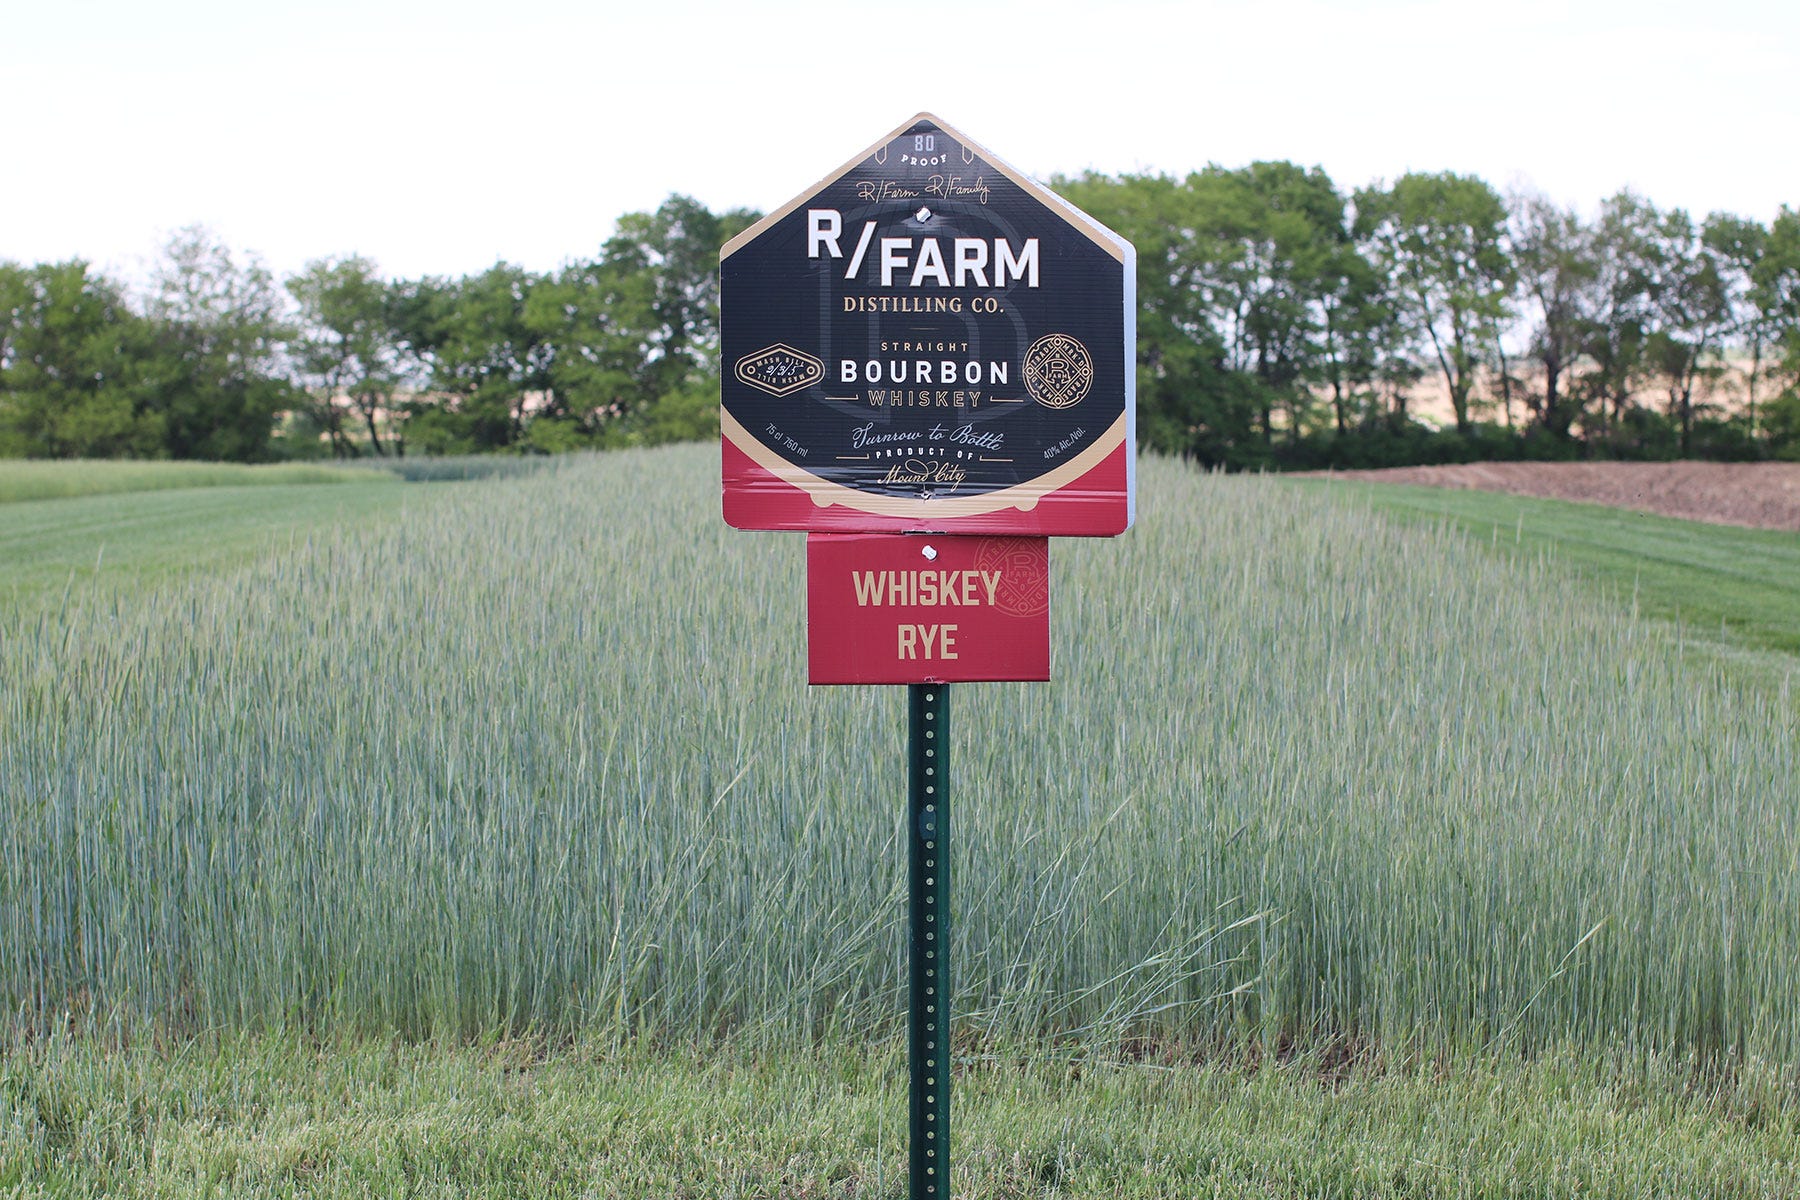 An R/Farm sign in front of a rye field